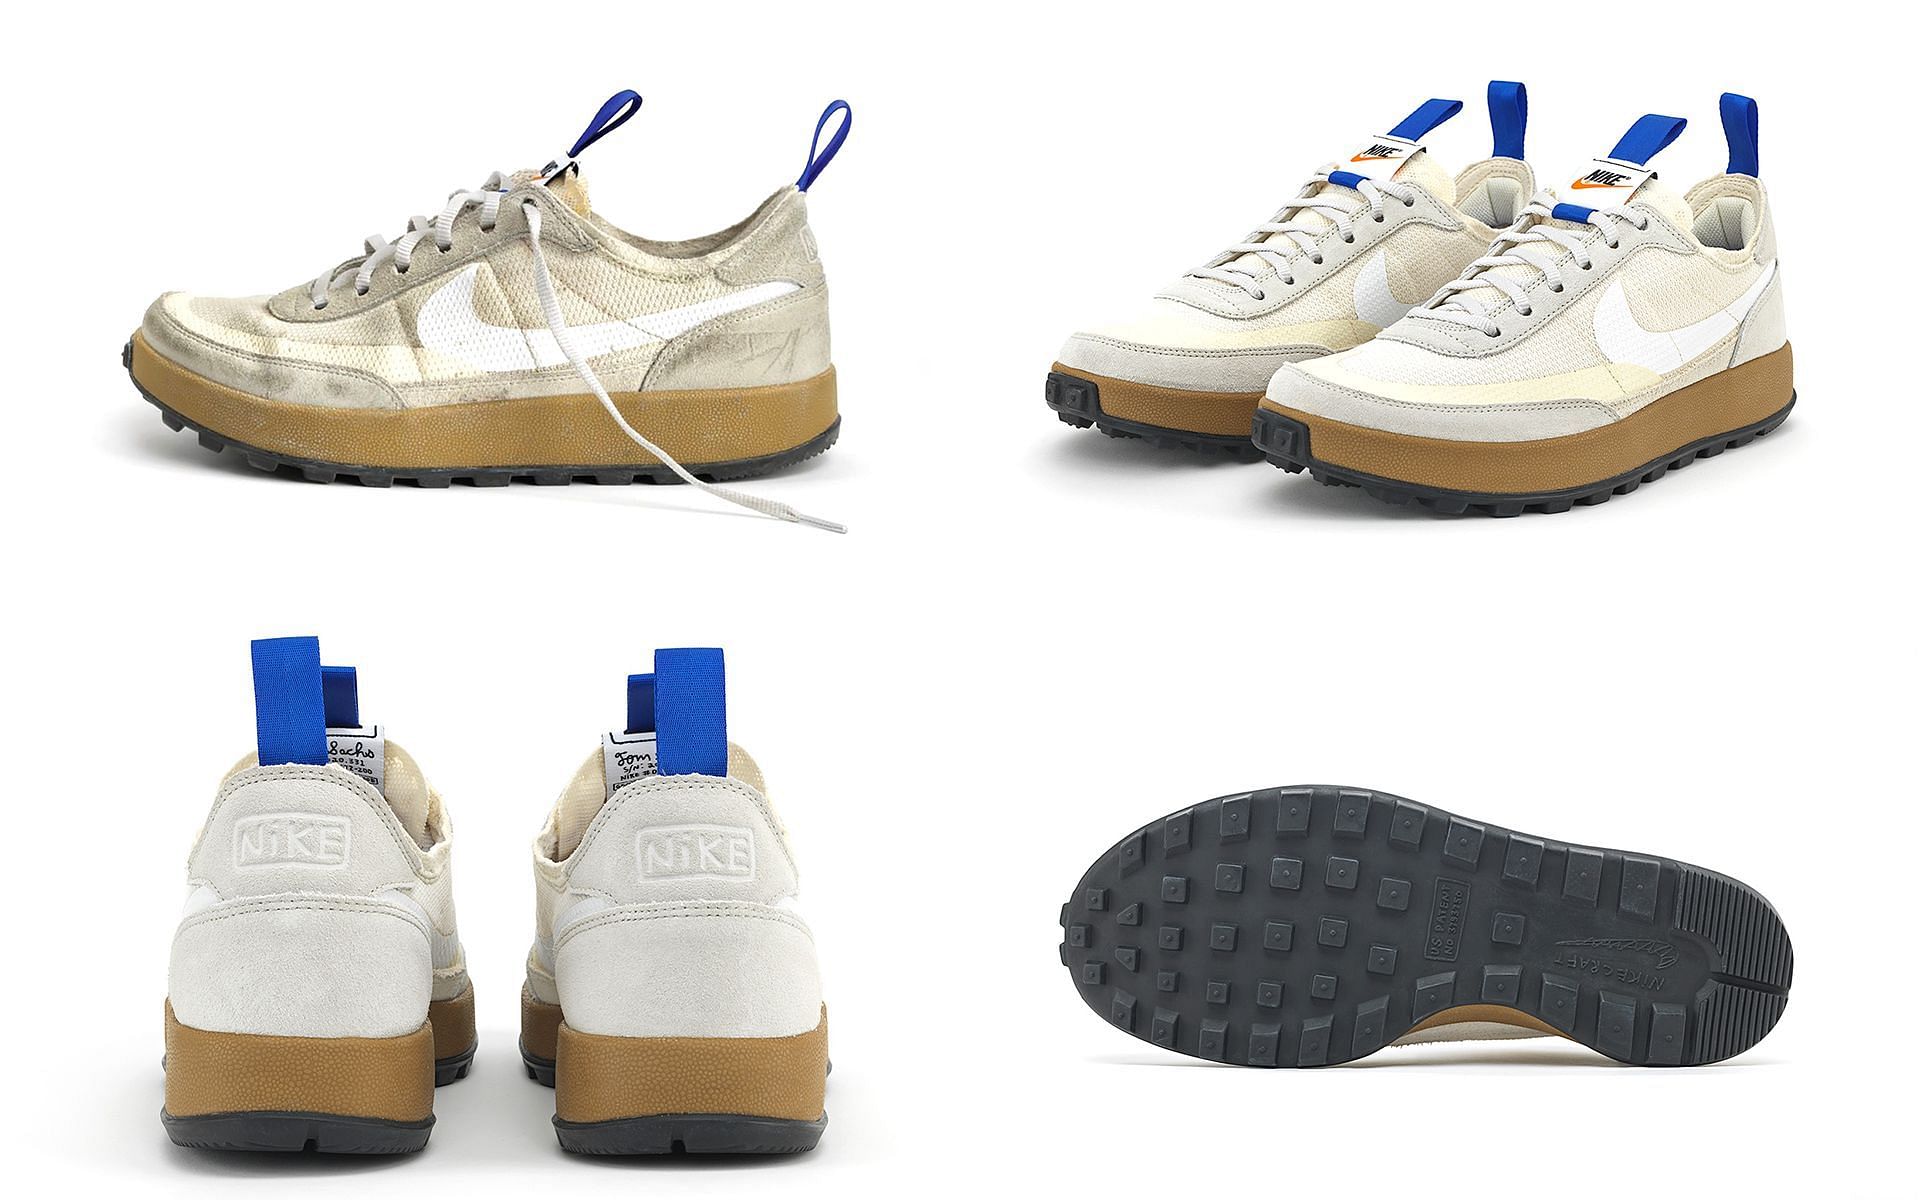 Where to buy Tom Sachs x NikeCraft General Purpose shoe? Release 